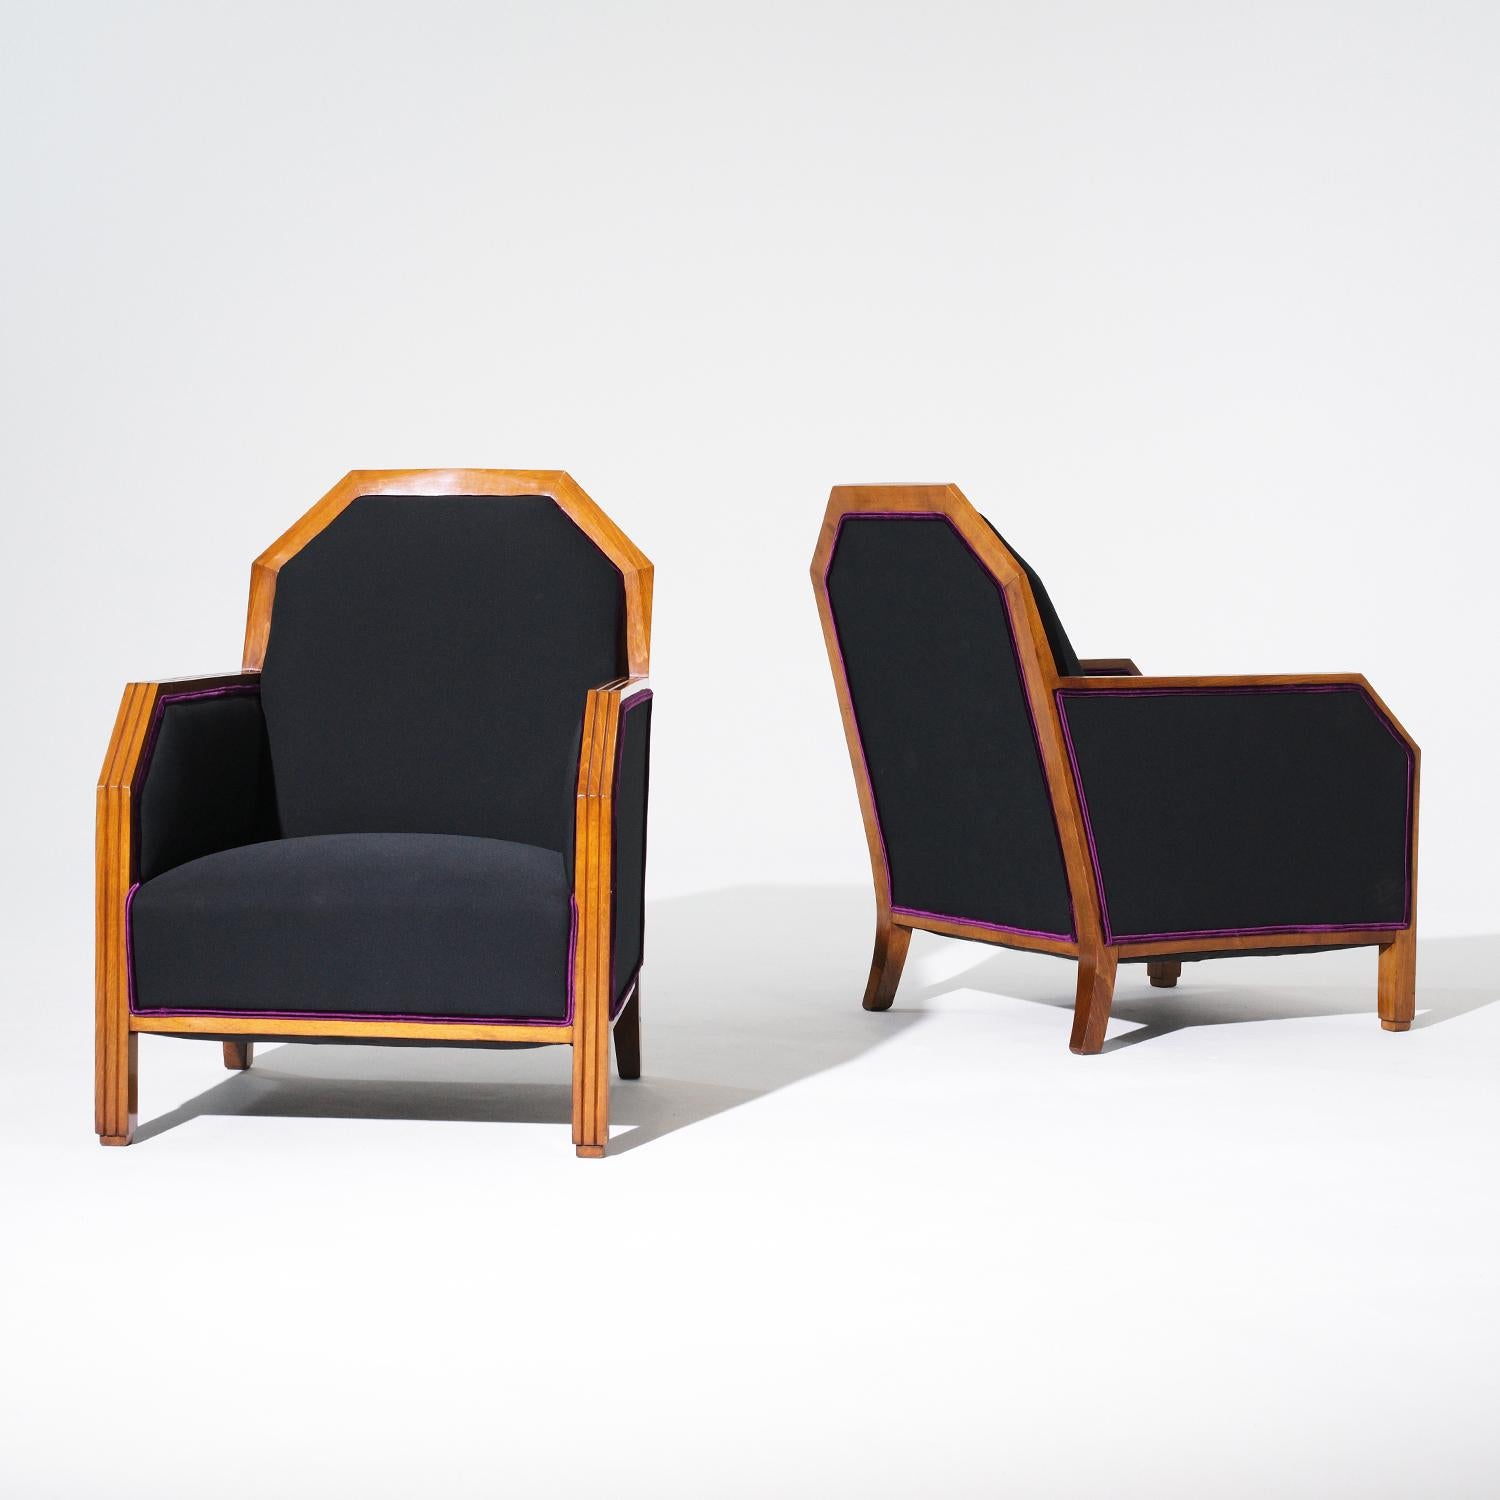 A vintage French pair of stunning Art Deco club chairs with black linen upholstery. The frame is made of hand crafted tinted Birchwood, in good condition. Minor stain on one of the chairs, due to age. Wear consistent with age and use. Circa 1930